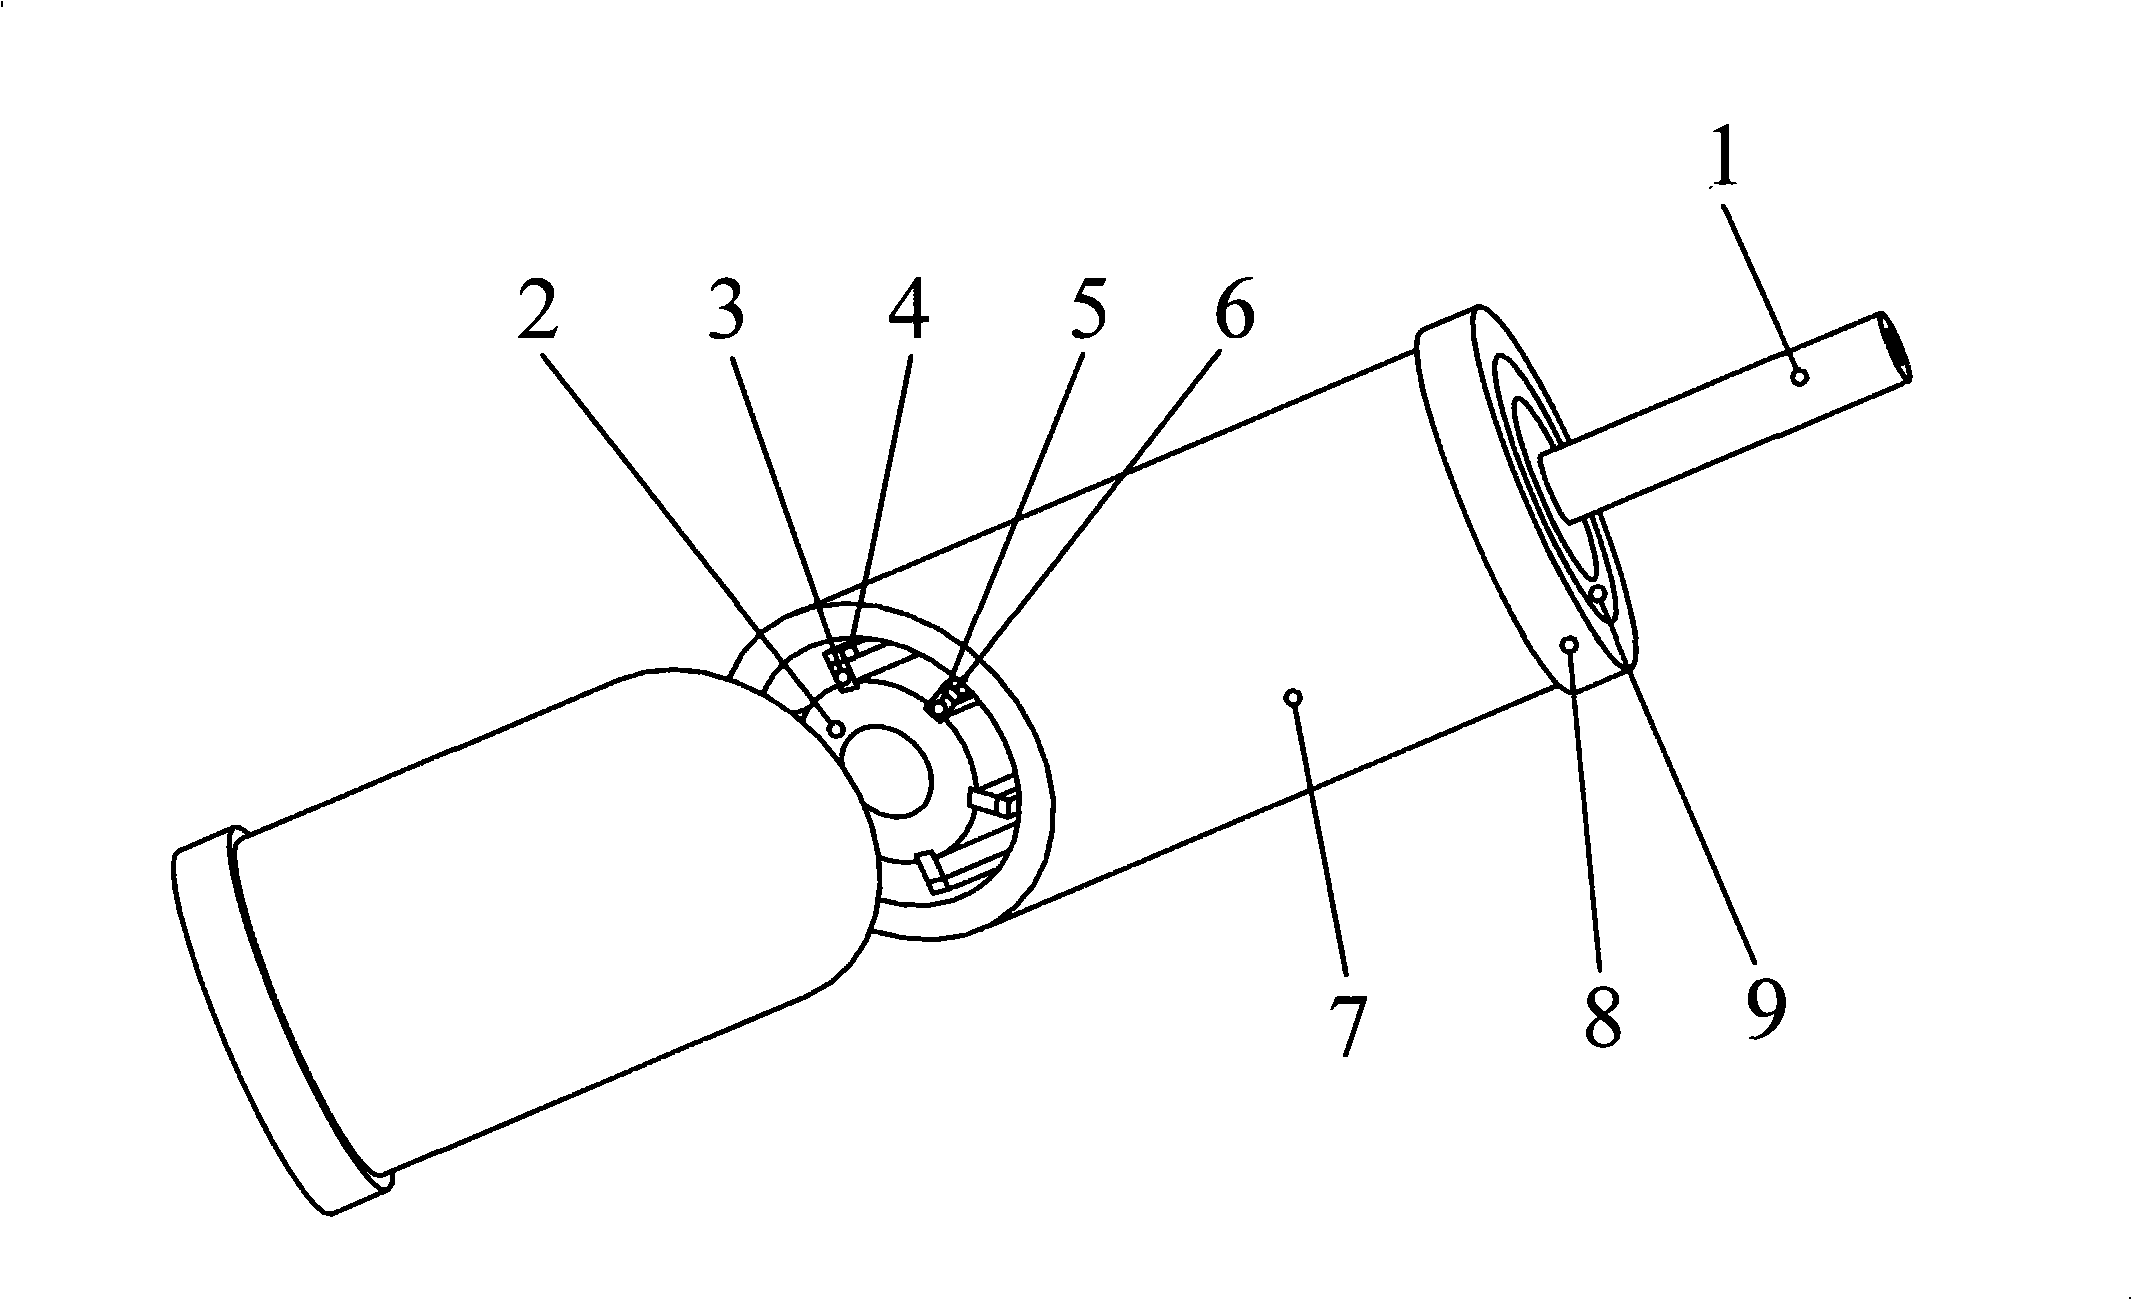 Rotary cylindrical magnetron sputtering target